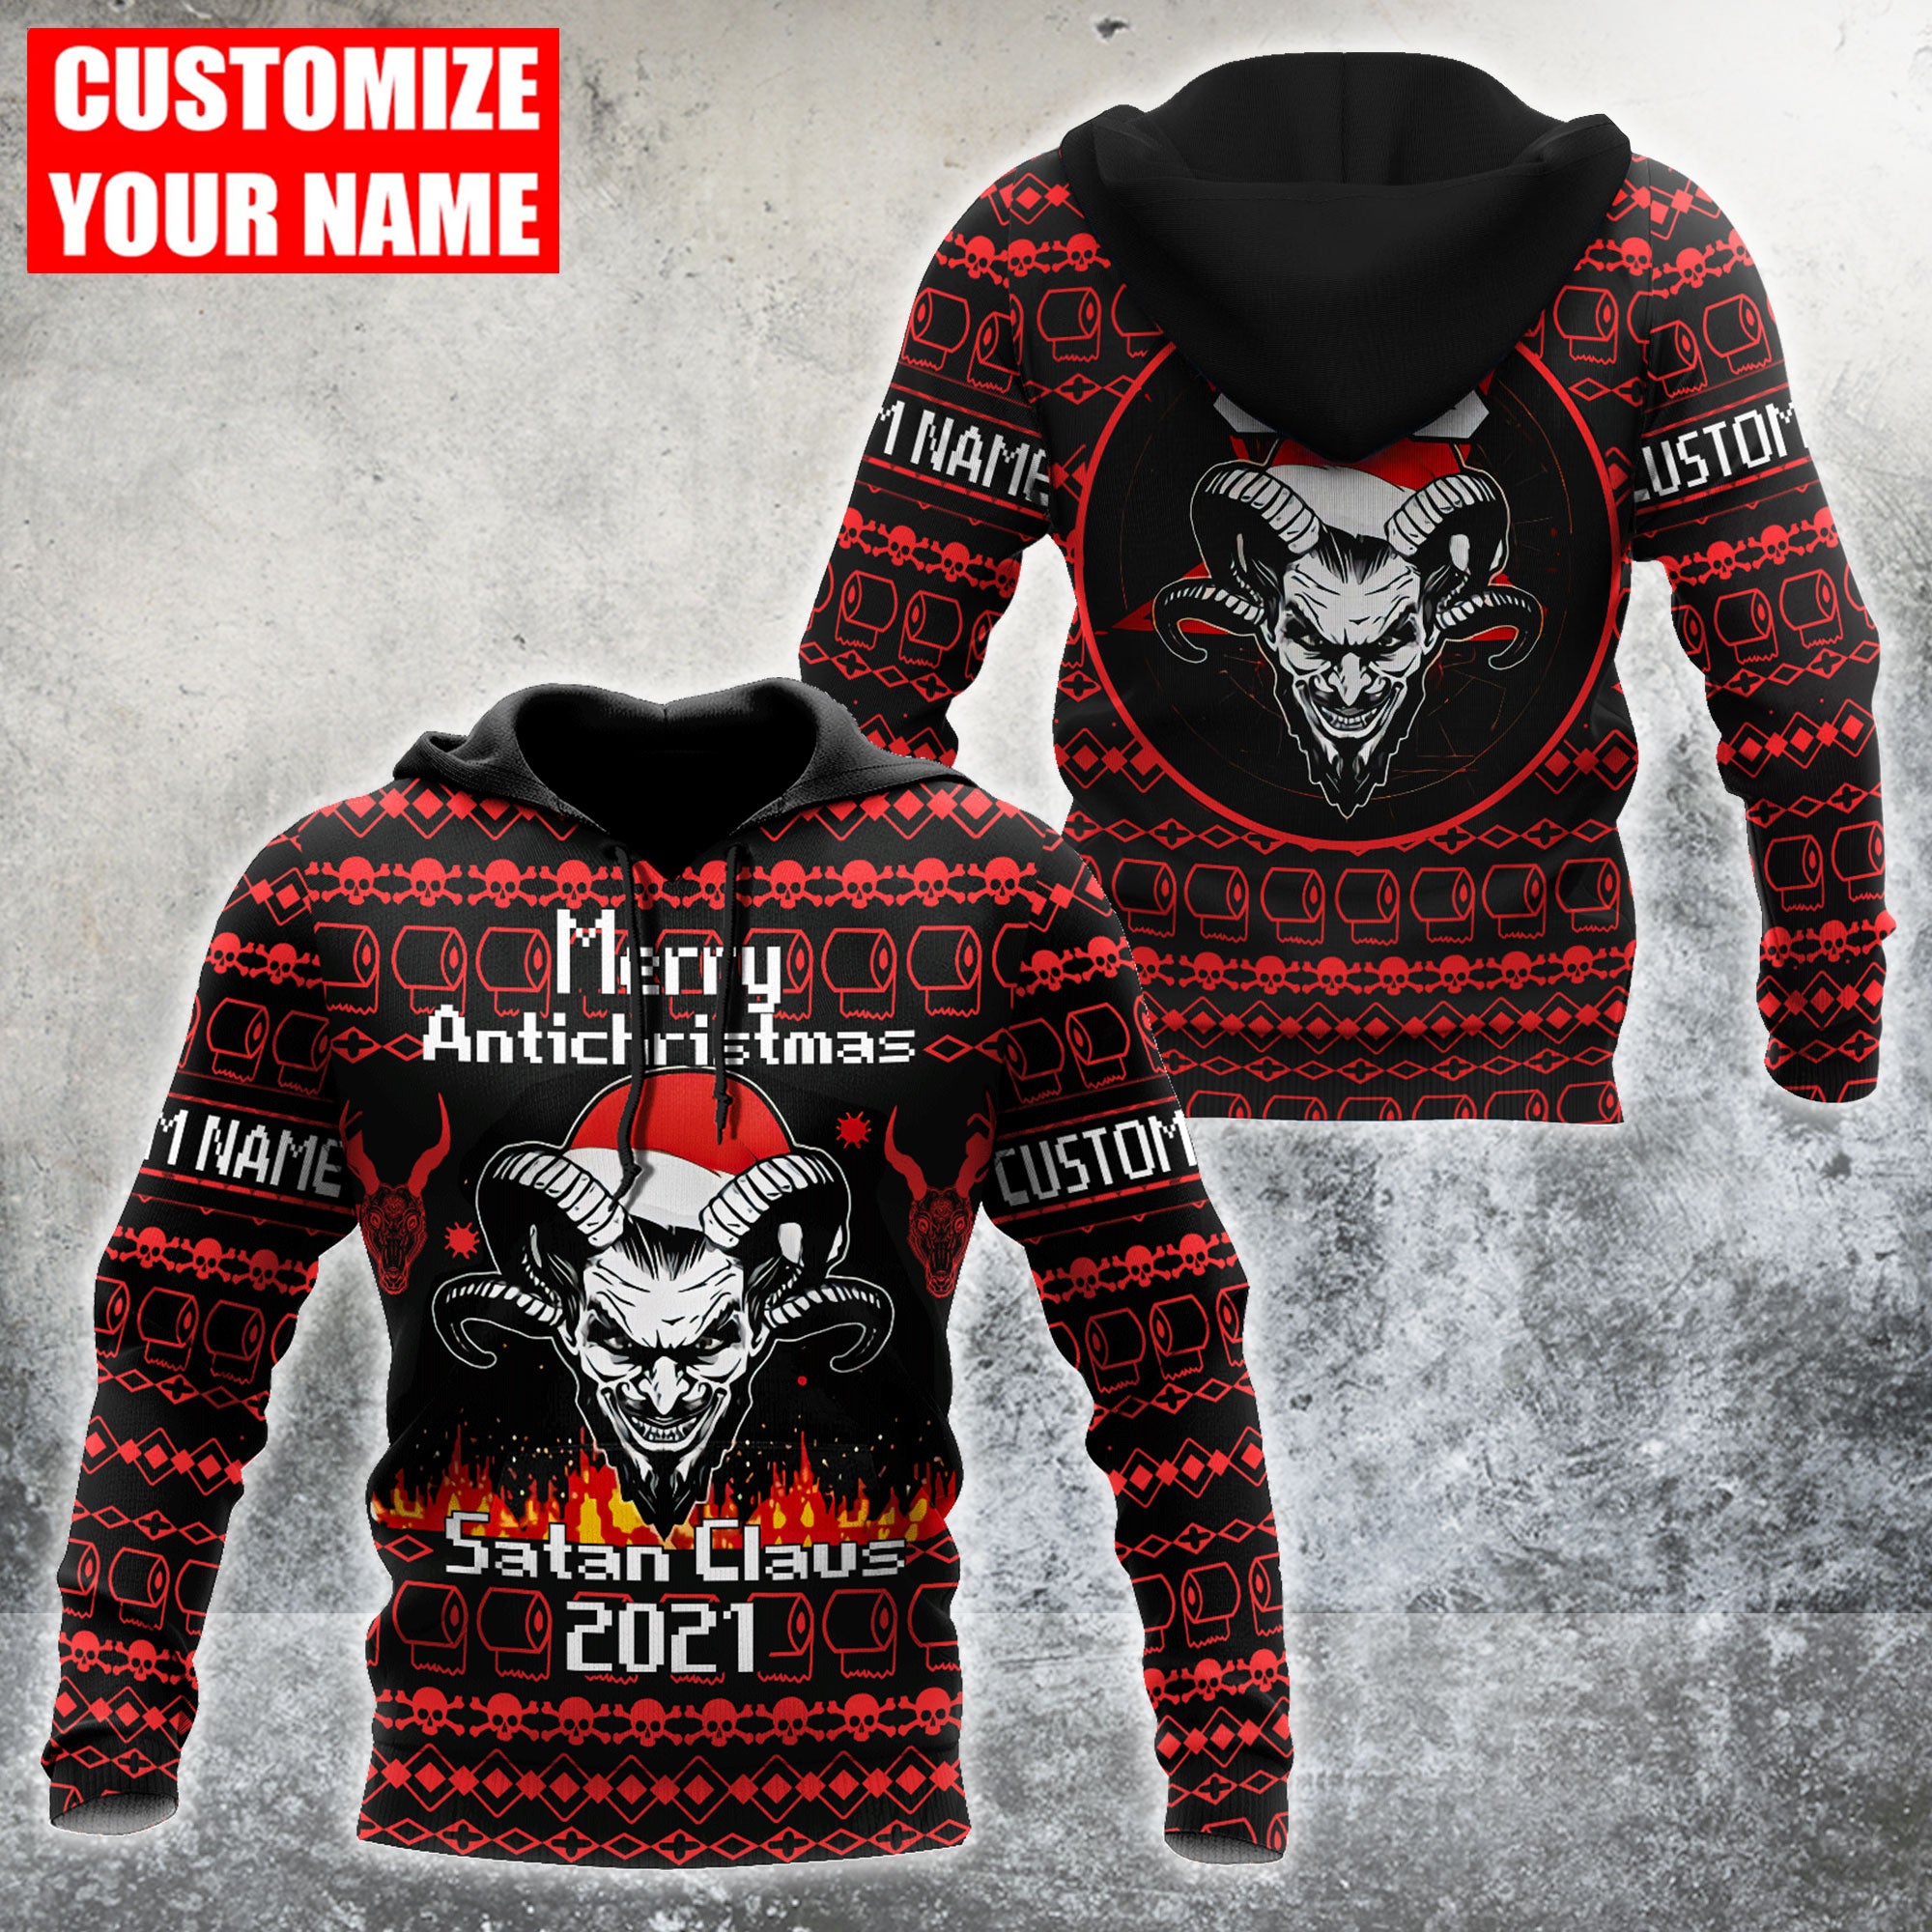 Customize Name Skull Satanic 3D All Over Printed Unisex Shirts